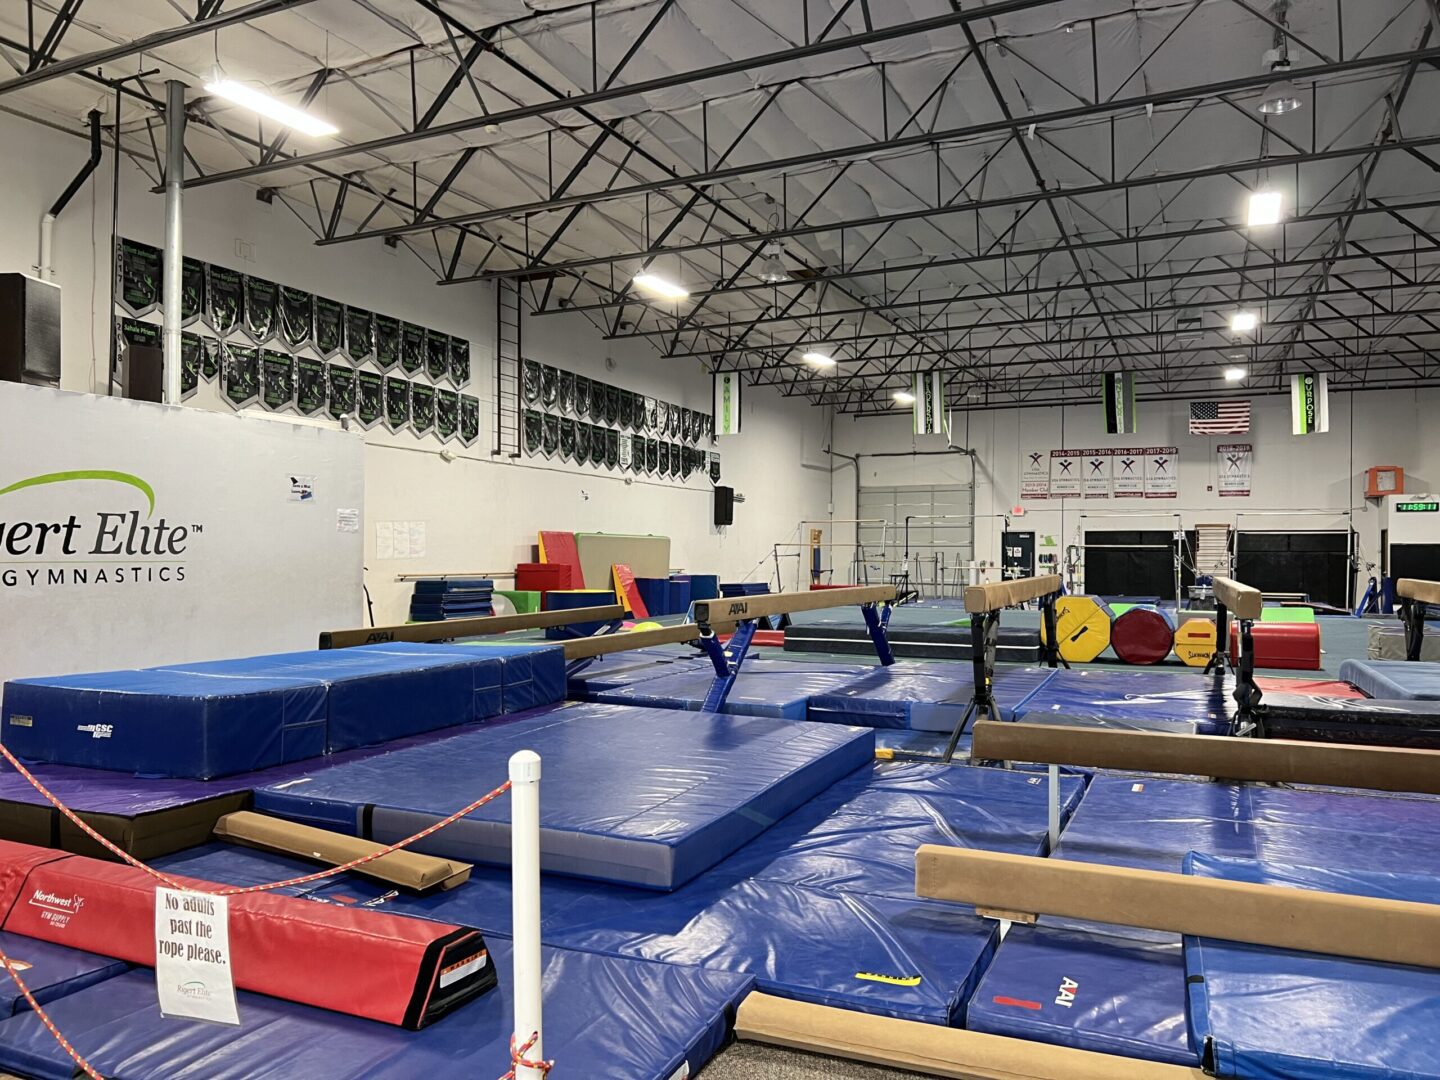 A gym with many different mats and poles.